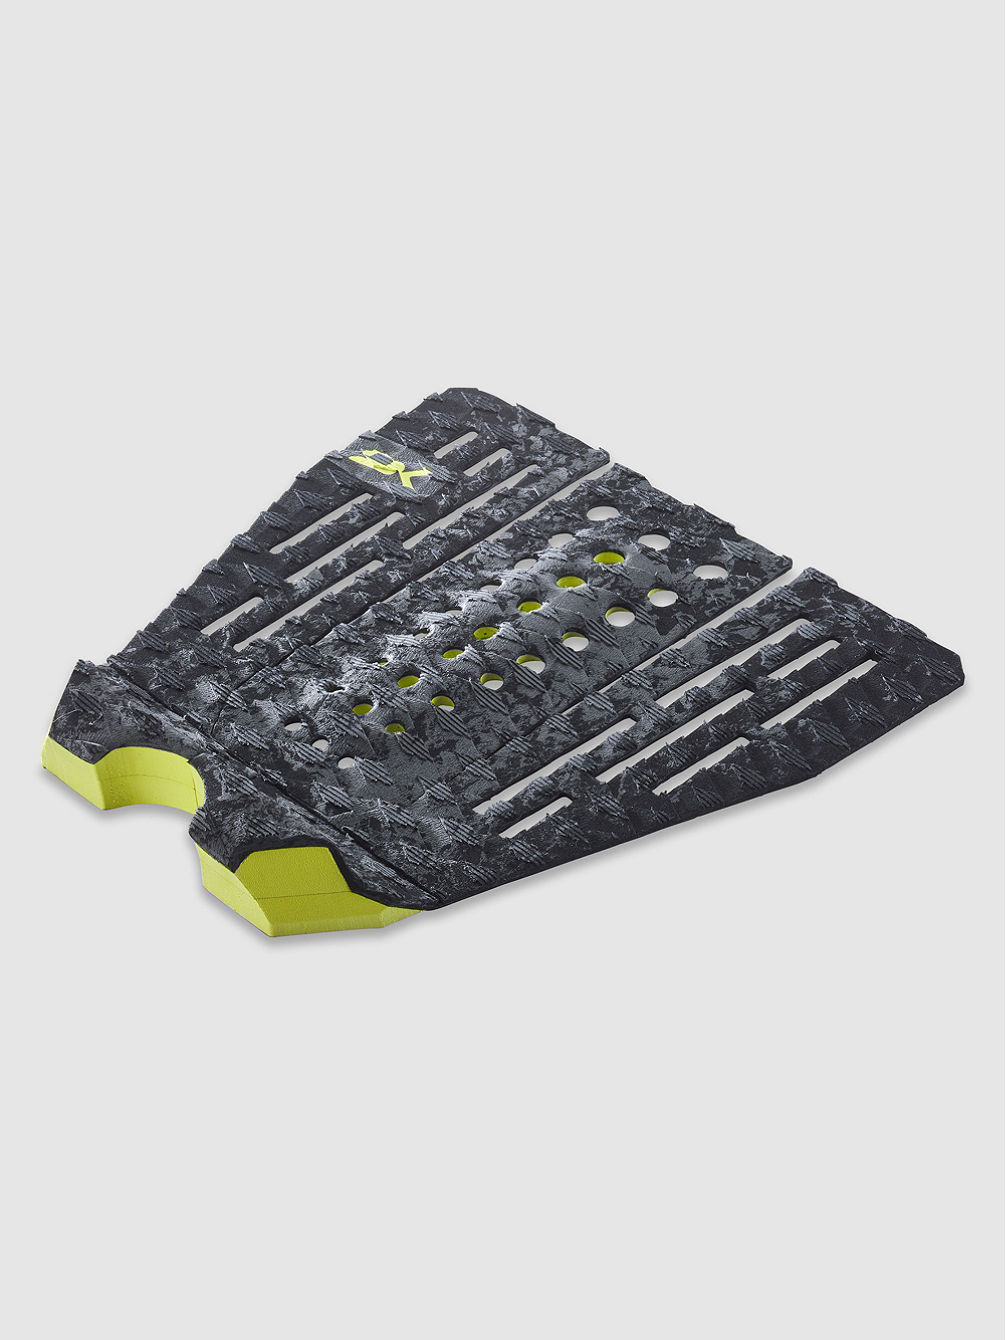 Evade Surf Traction Tail Pad